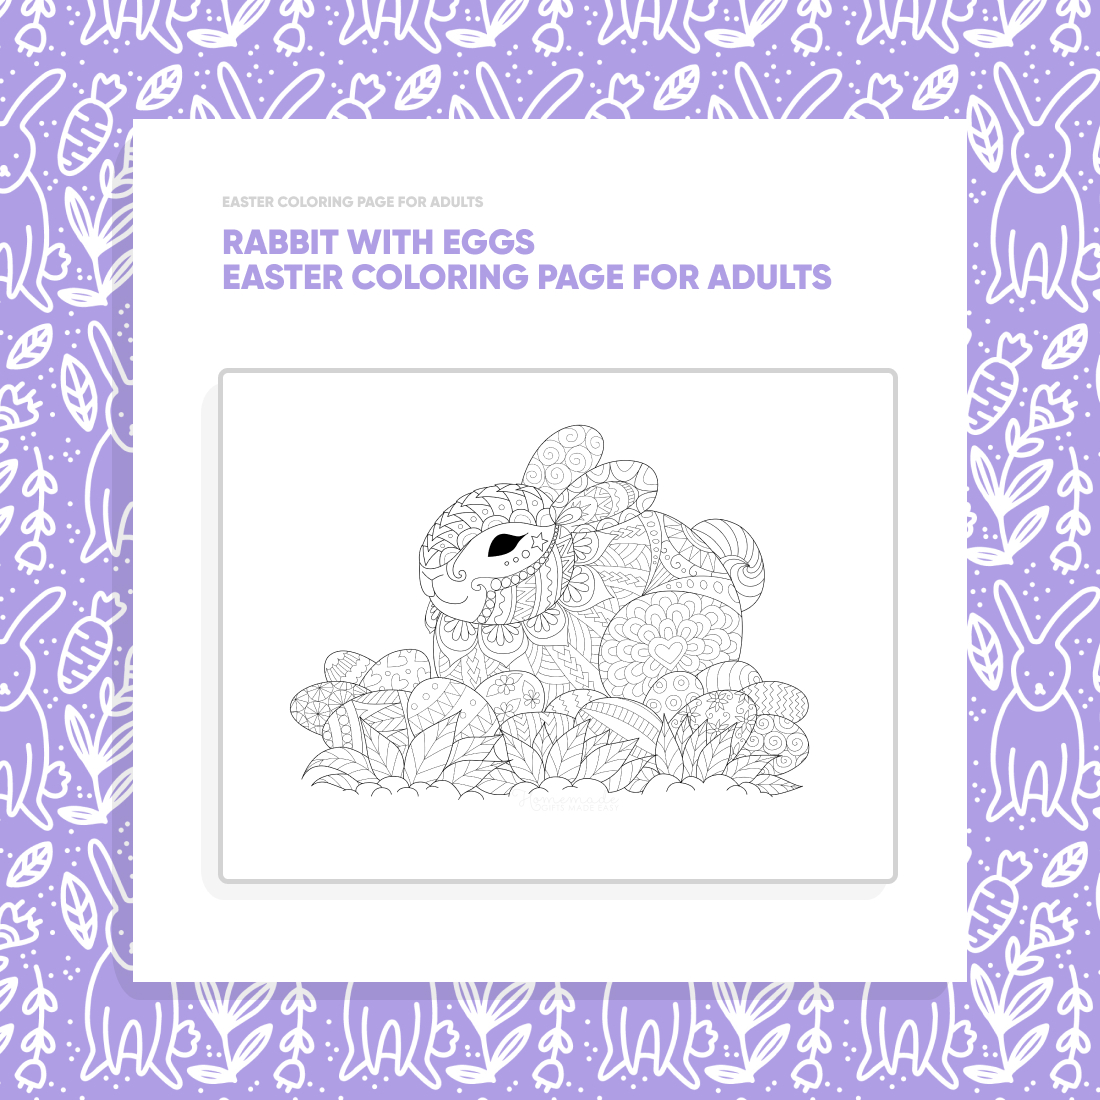 Rabbit with Eggs Easter Coloring Page for Adults cover.